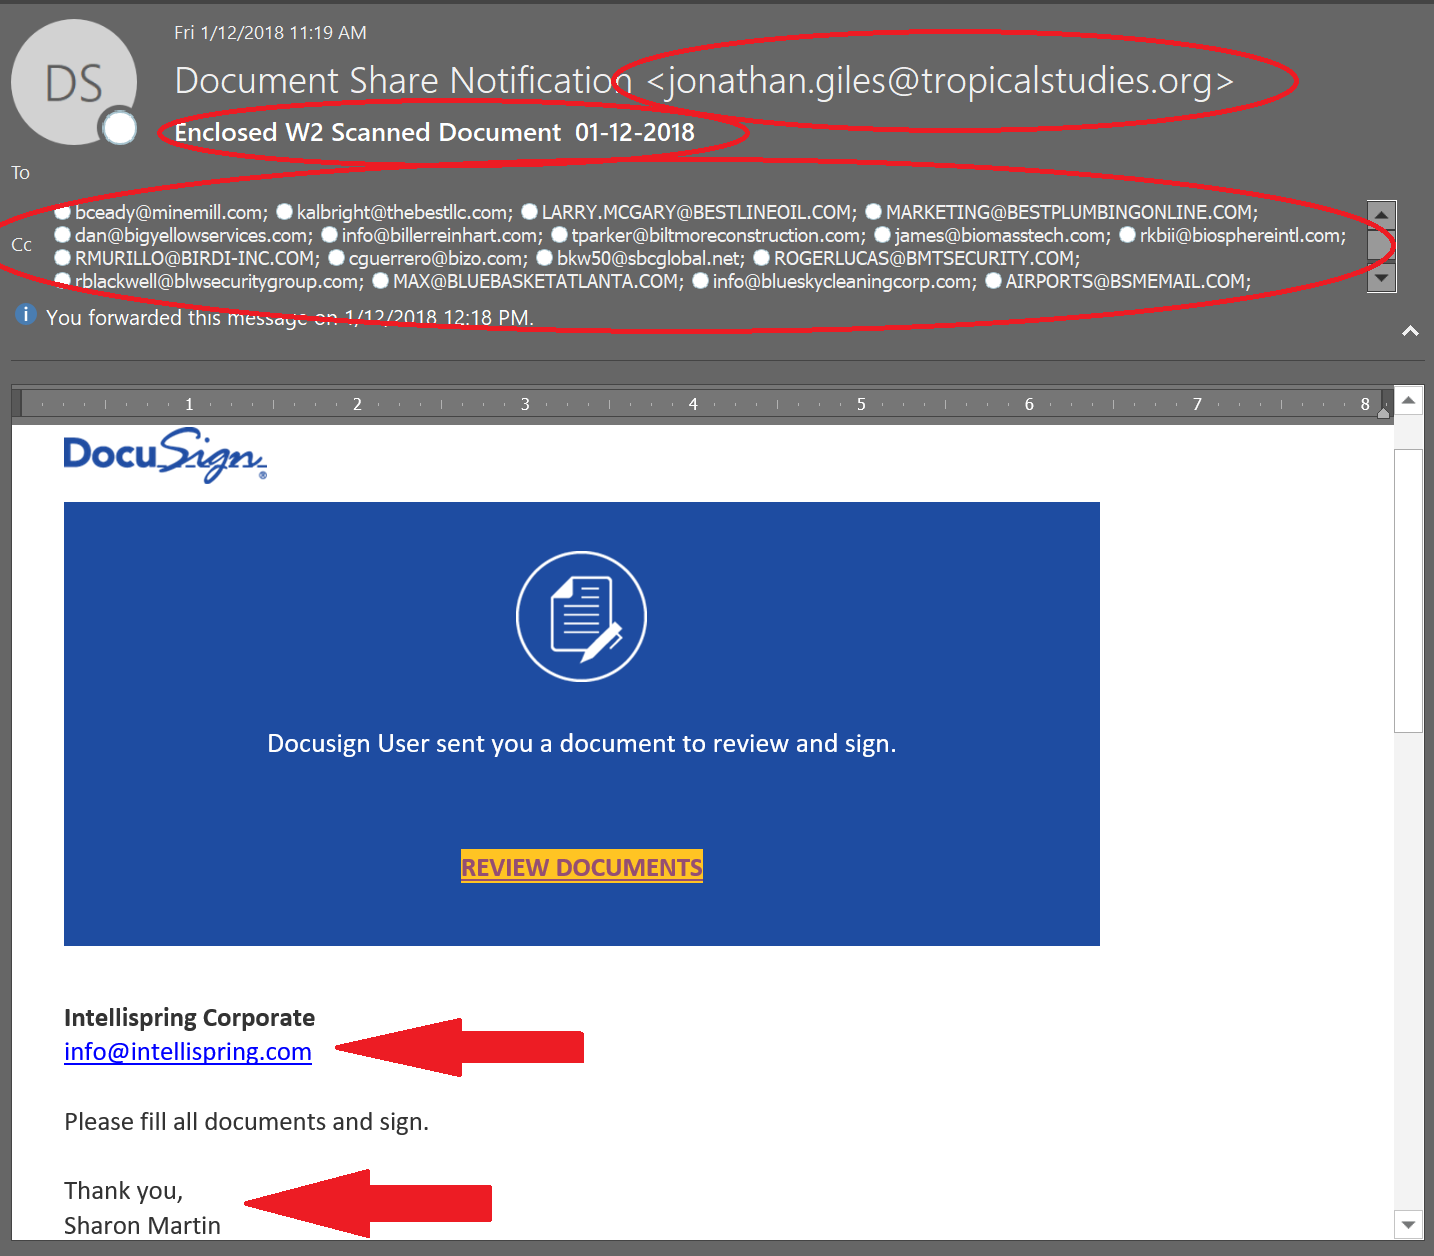 W2 Docusign Snip # 1.png